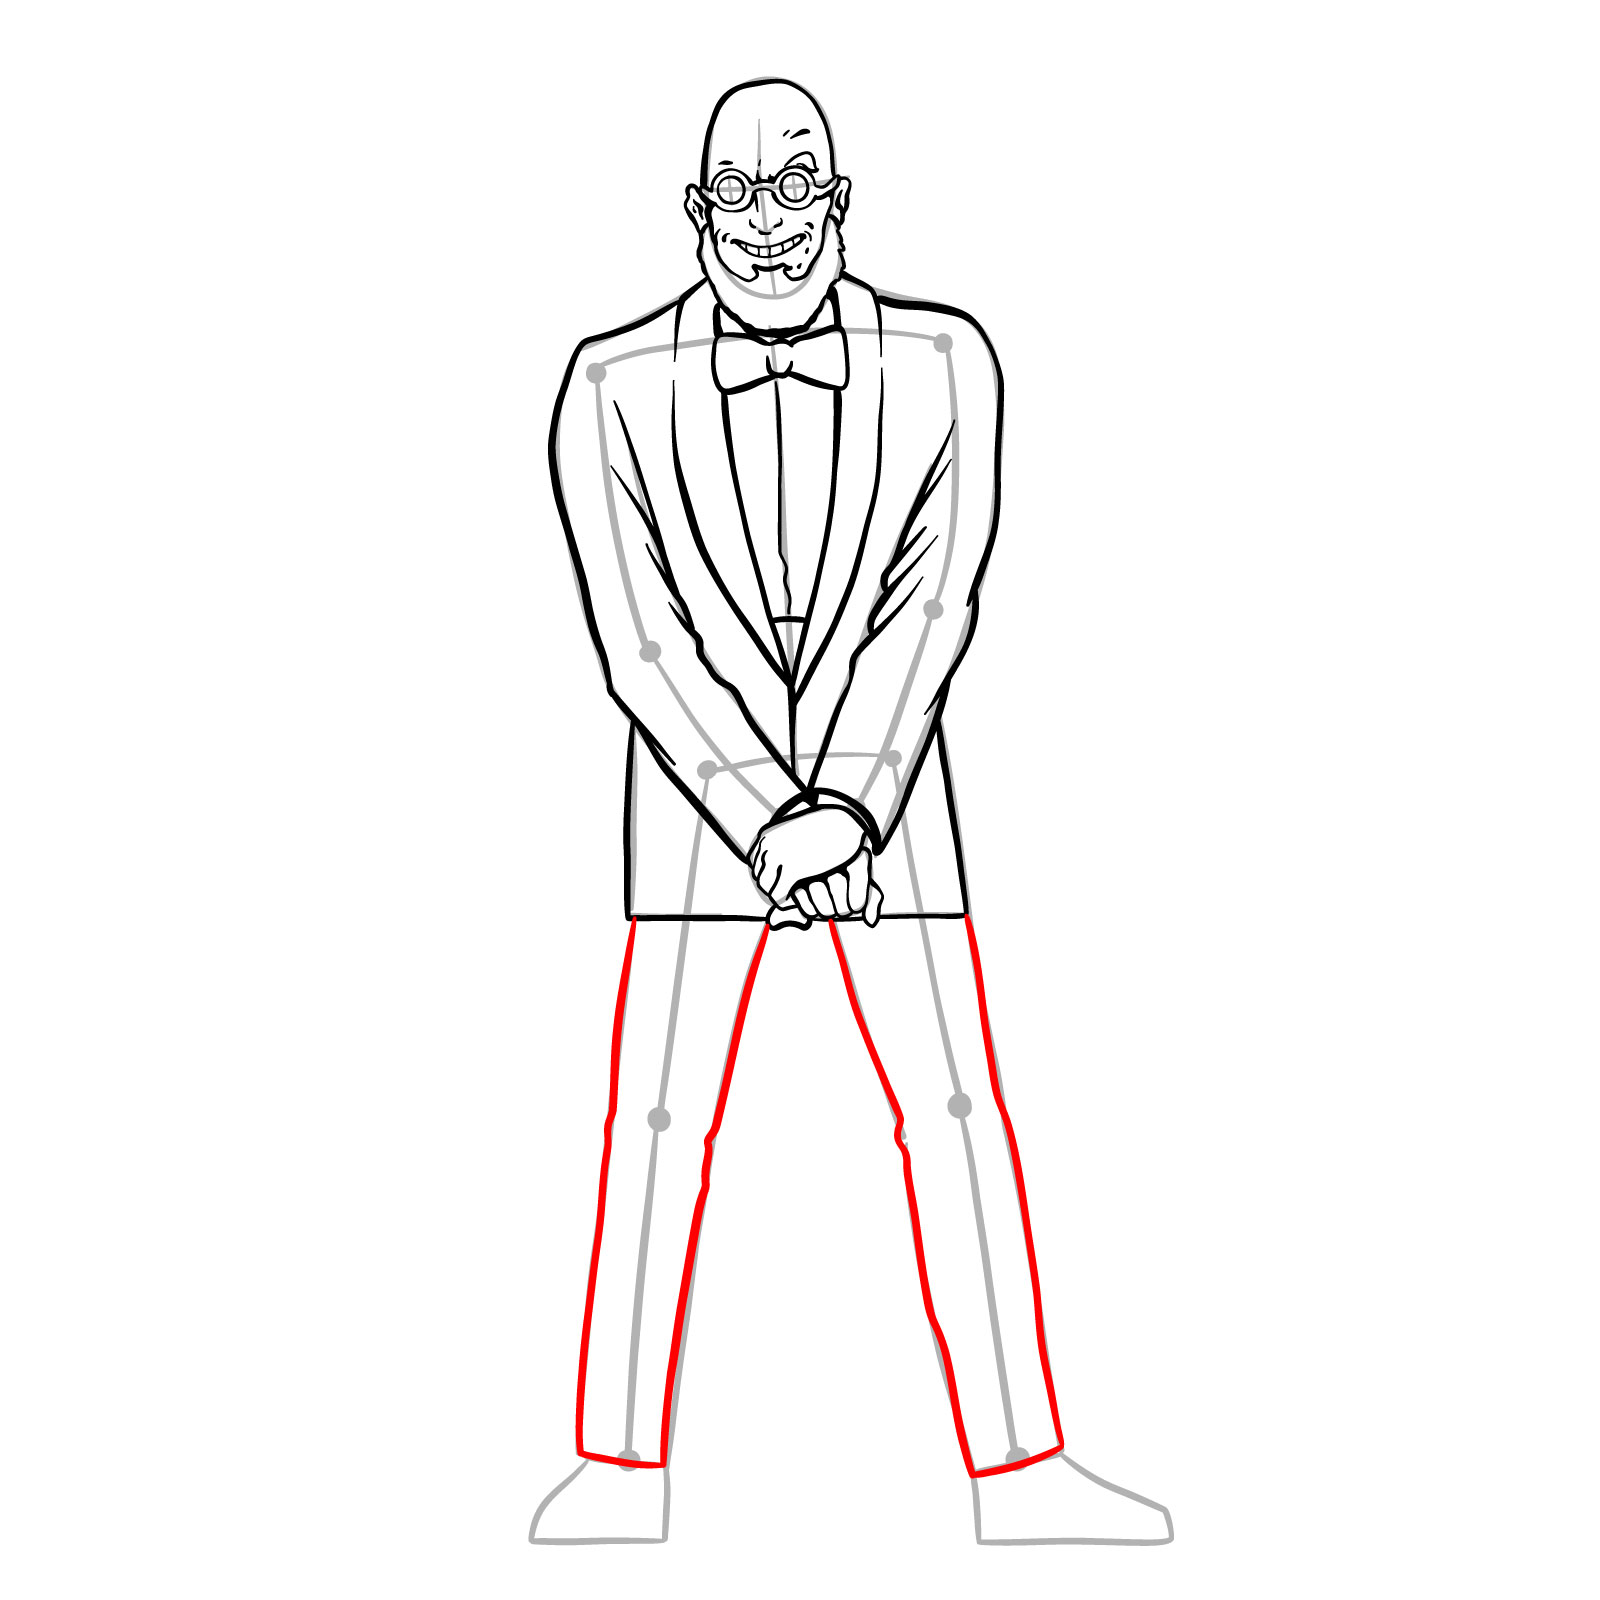 How to draw Dr. Hugo Strange from DC Comics - step 27